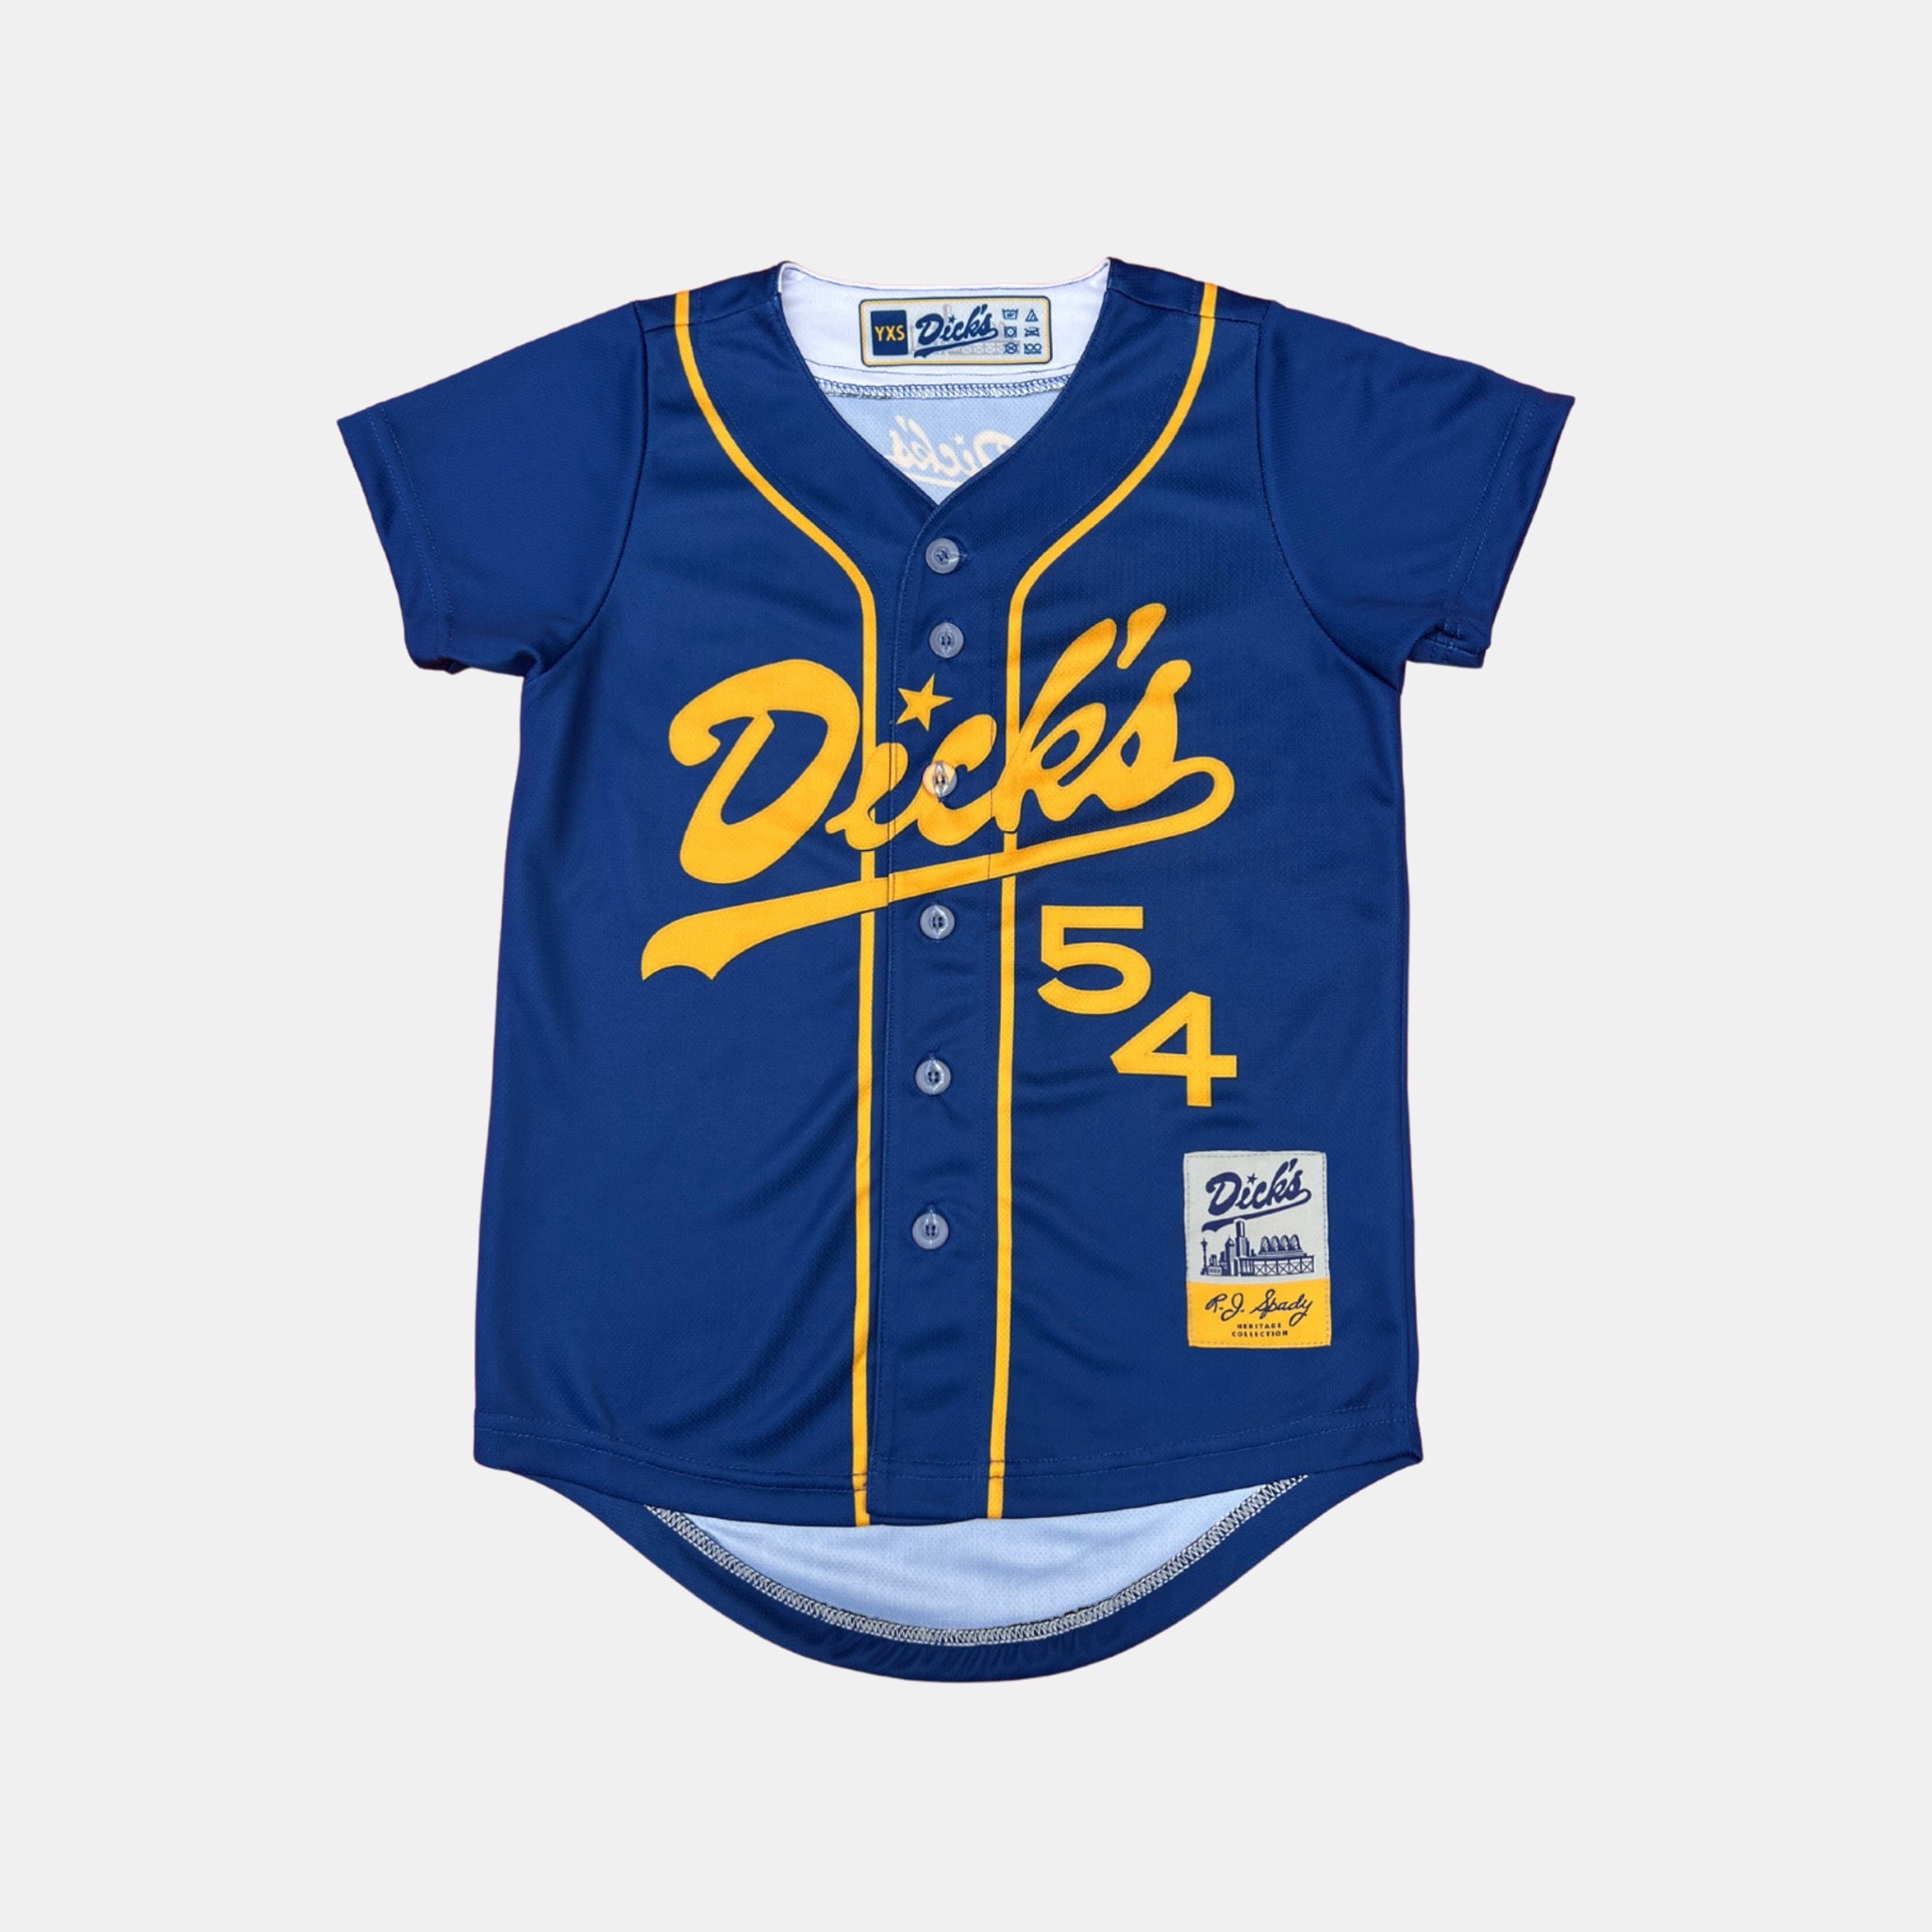 Youth Throwback Baseball Jersey – Dick's Drive-In Restaurants